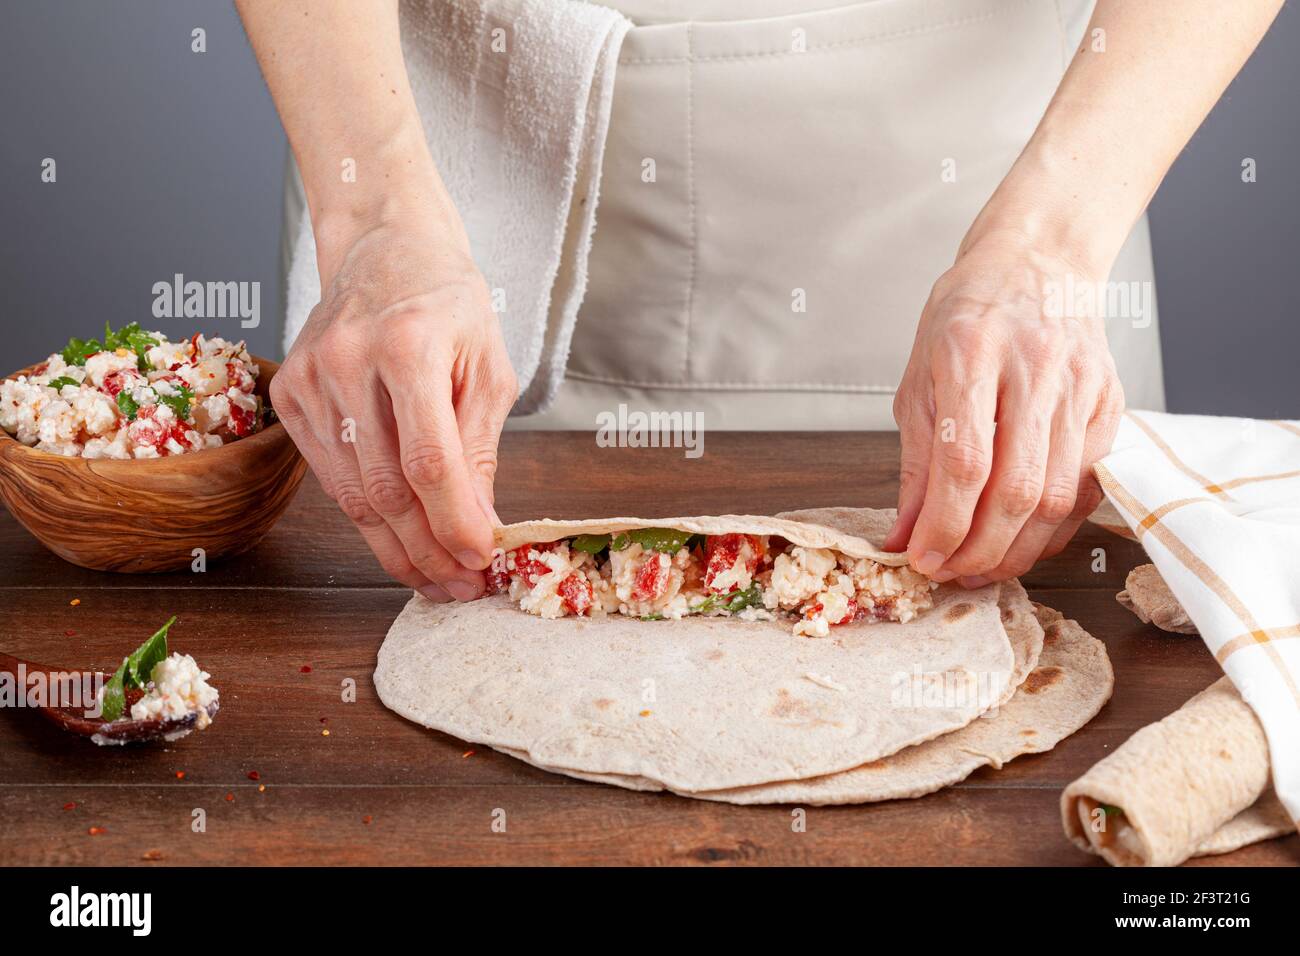 Sikma is a traditional Turkish wrap in mediterranean coast of silifke, mersin. Flat bread known as bazlama is laid and filled with mixture of cheese, Stock Photo